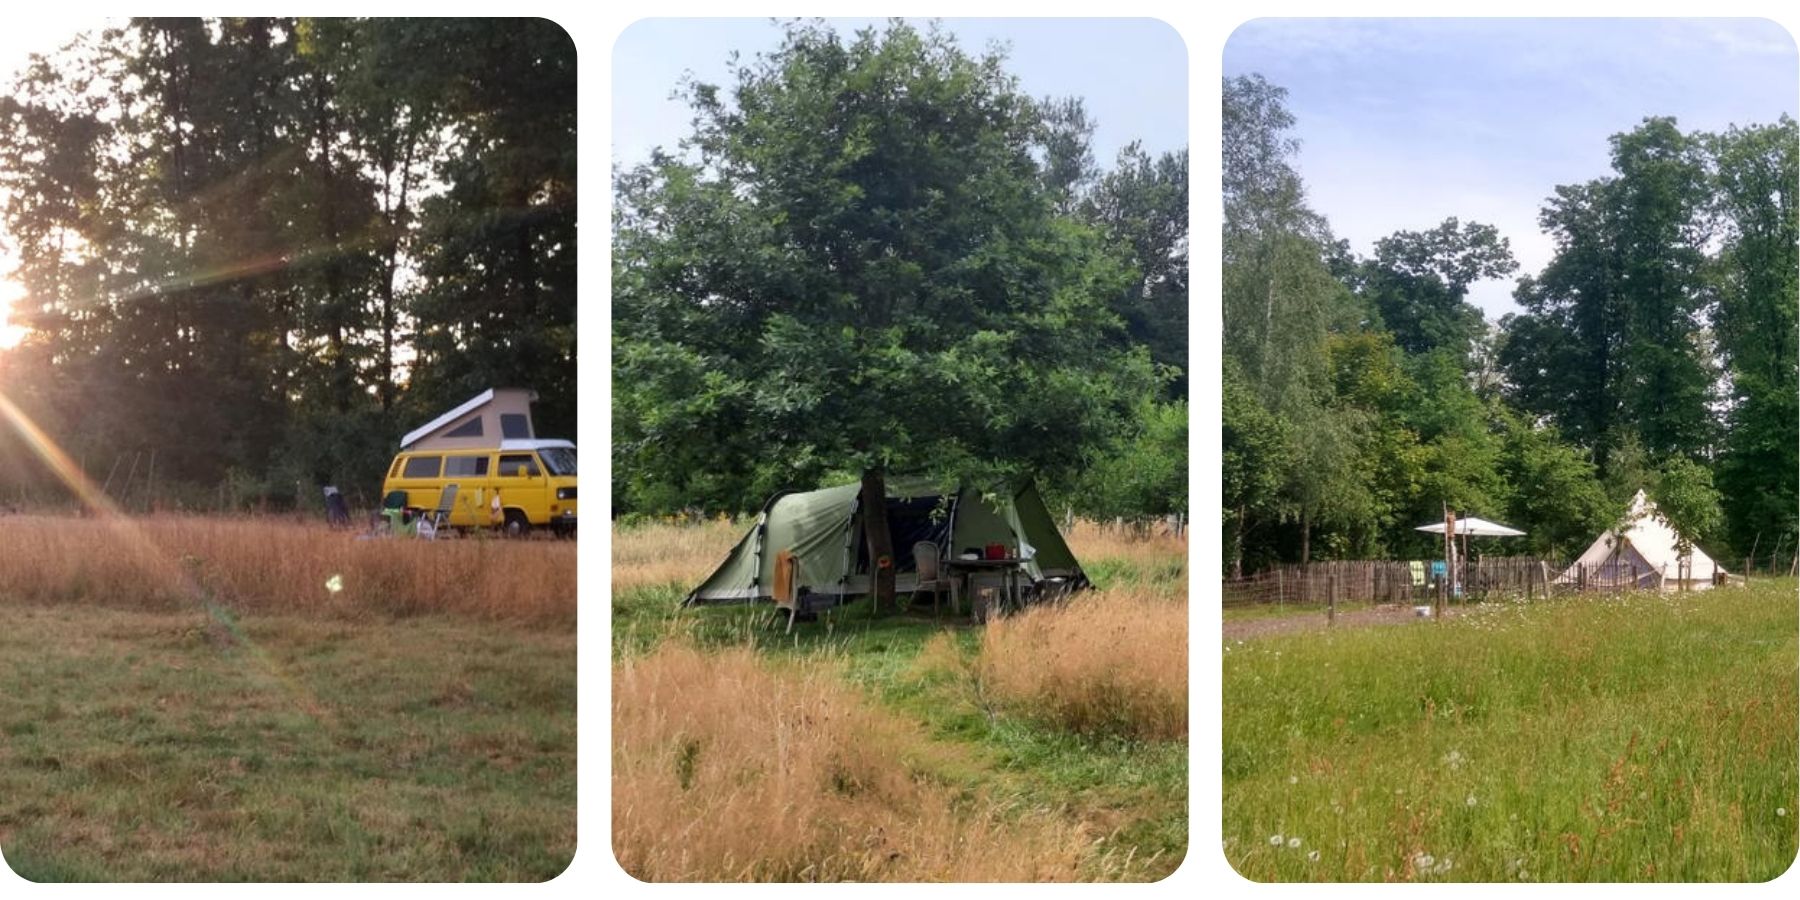 campervan in the meadows, tipi tent in the flower garden and a forest in the background